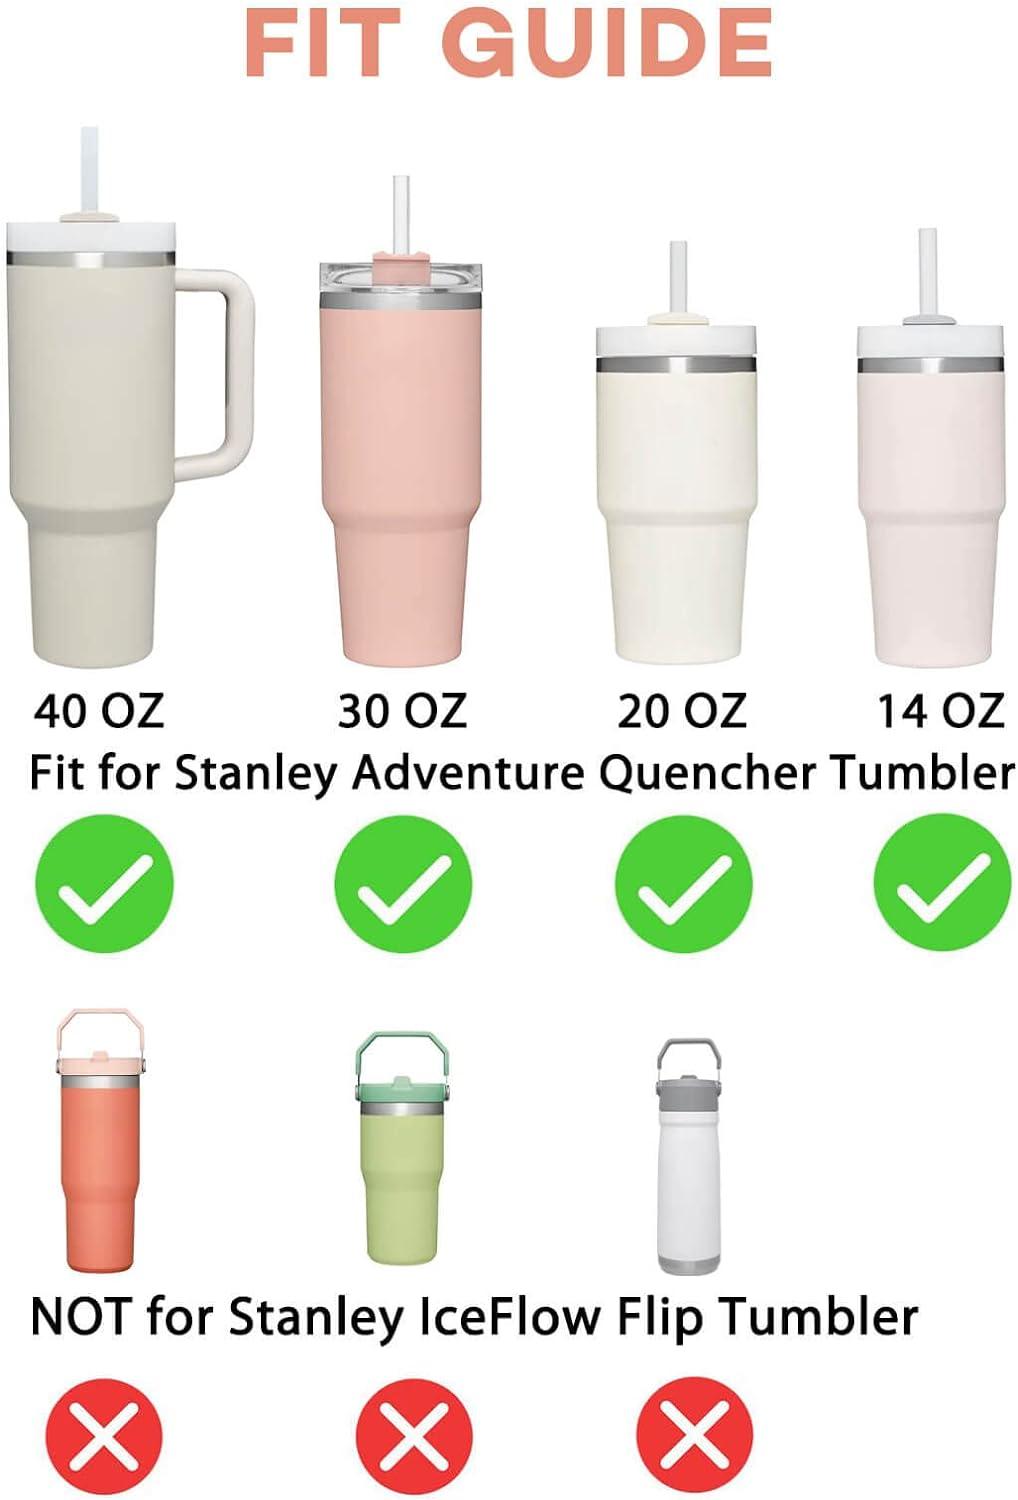  Replacement Straw Compatible with Stanley 40 oz 30 oz